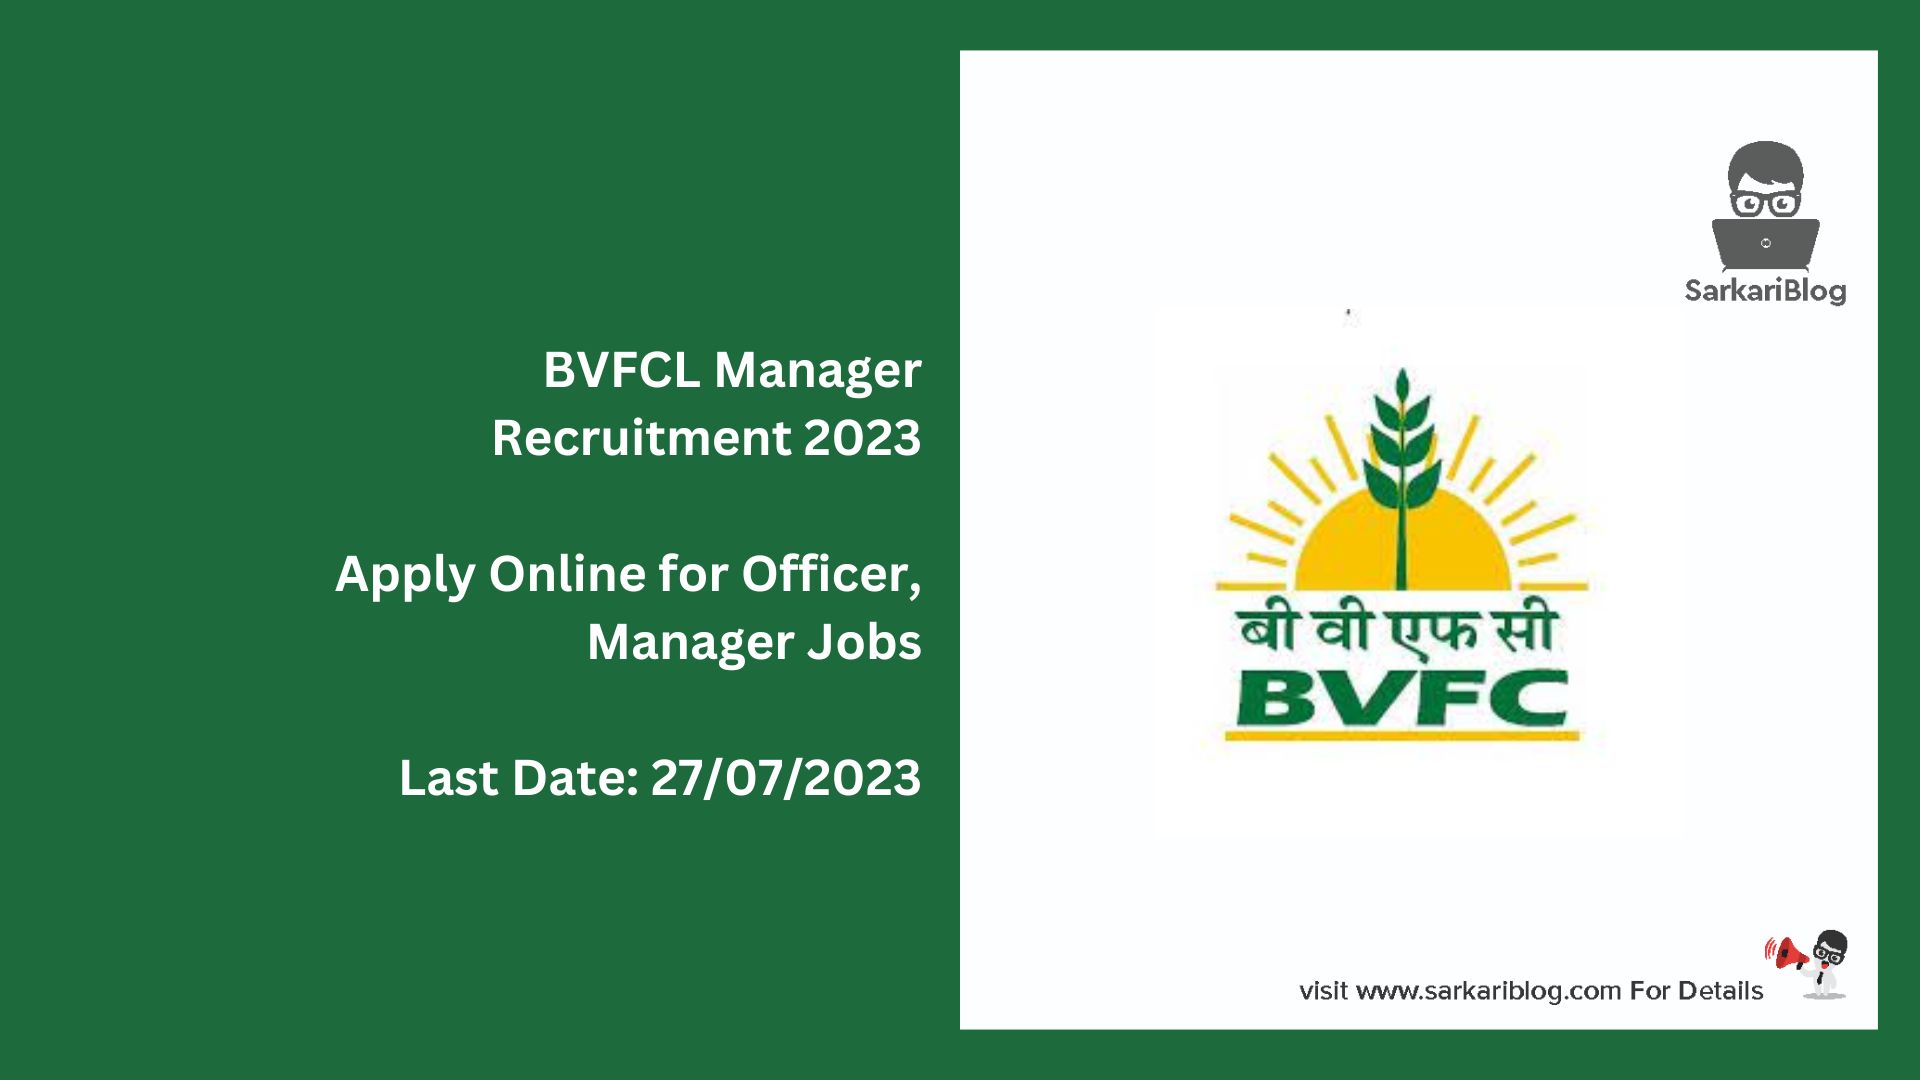 BVFCL Manager Recruitment 2023